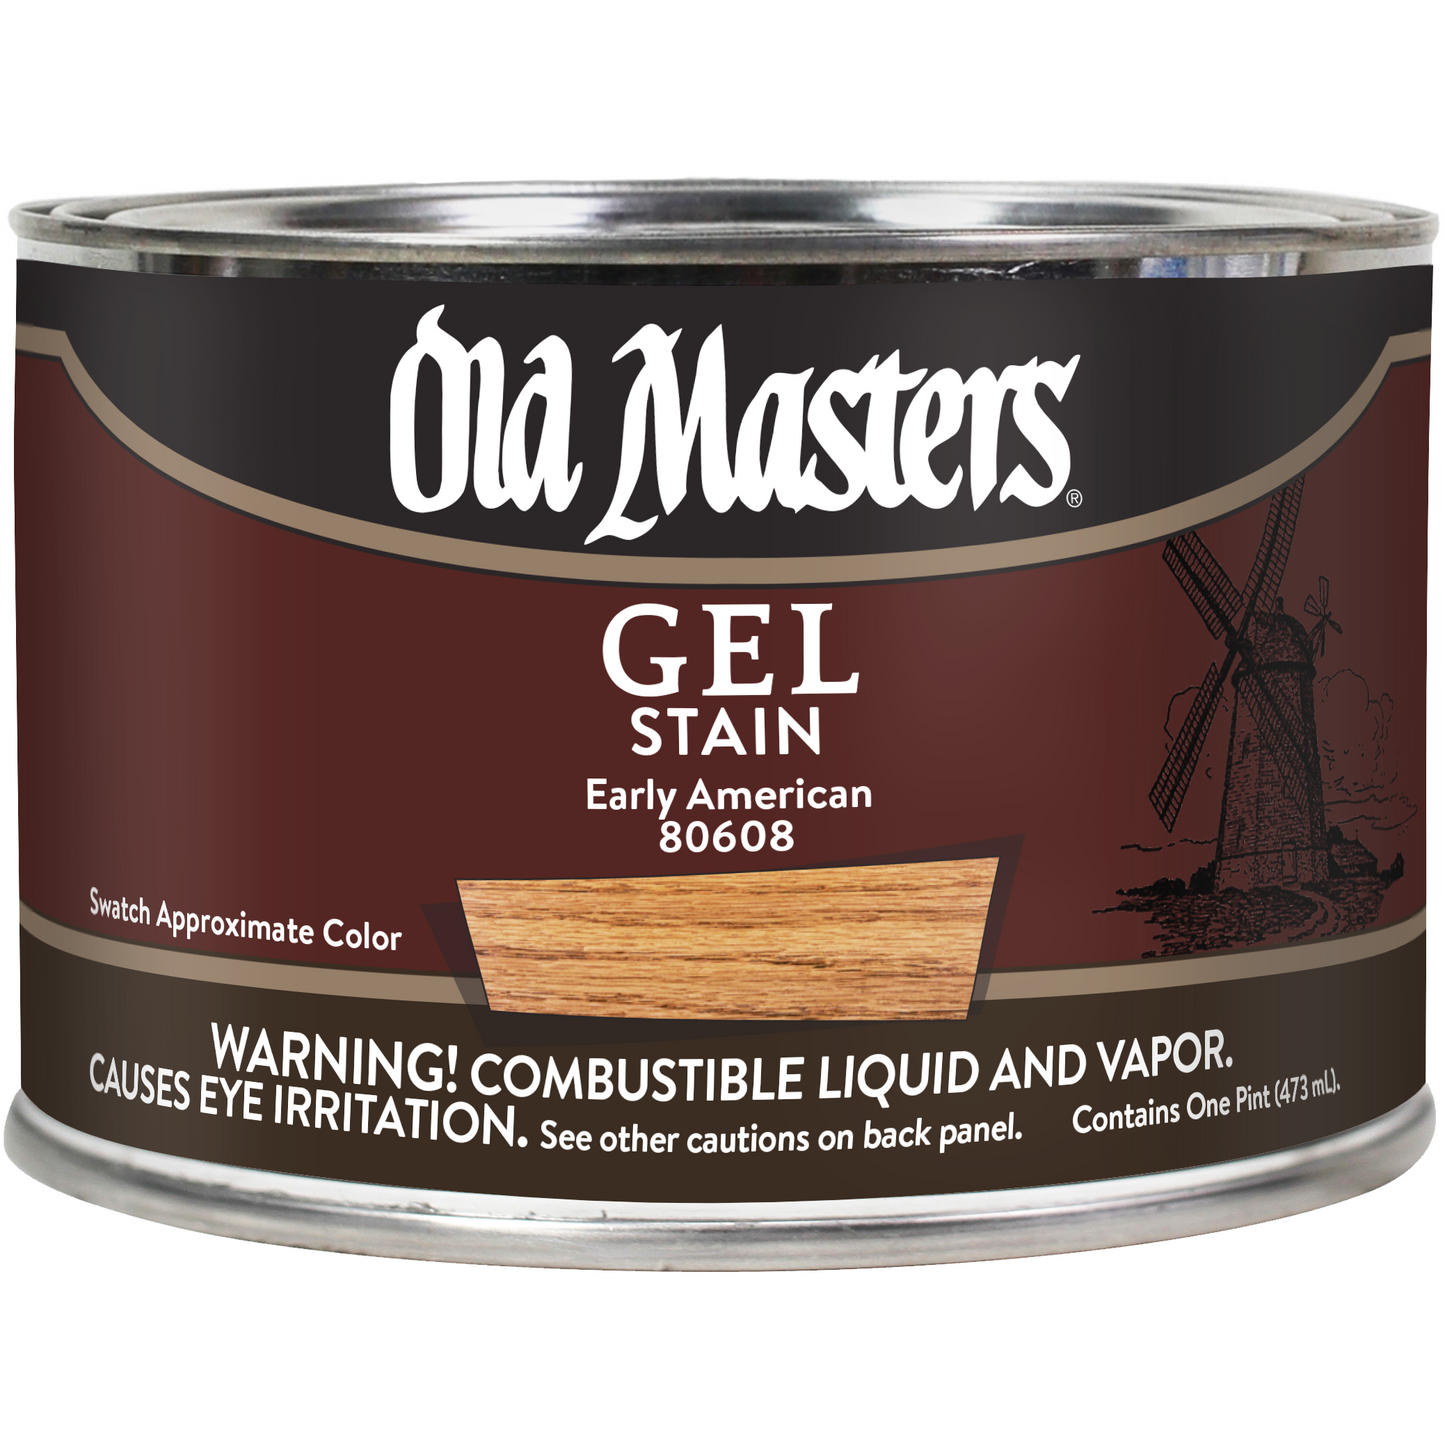 Old Masters Gel Stain - Early American